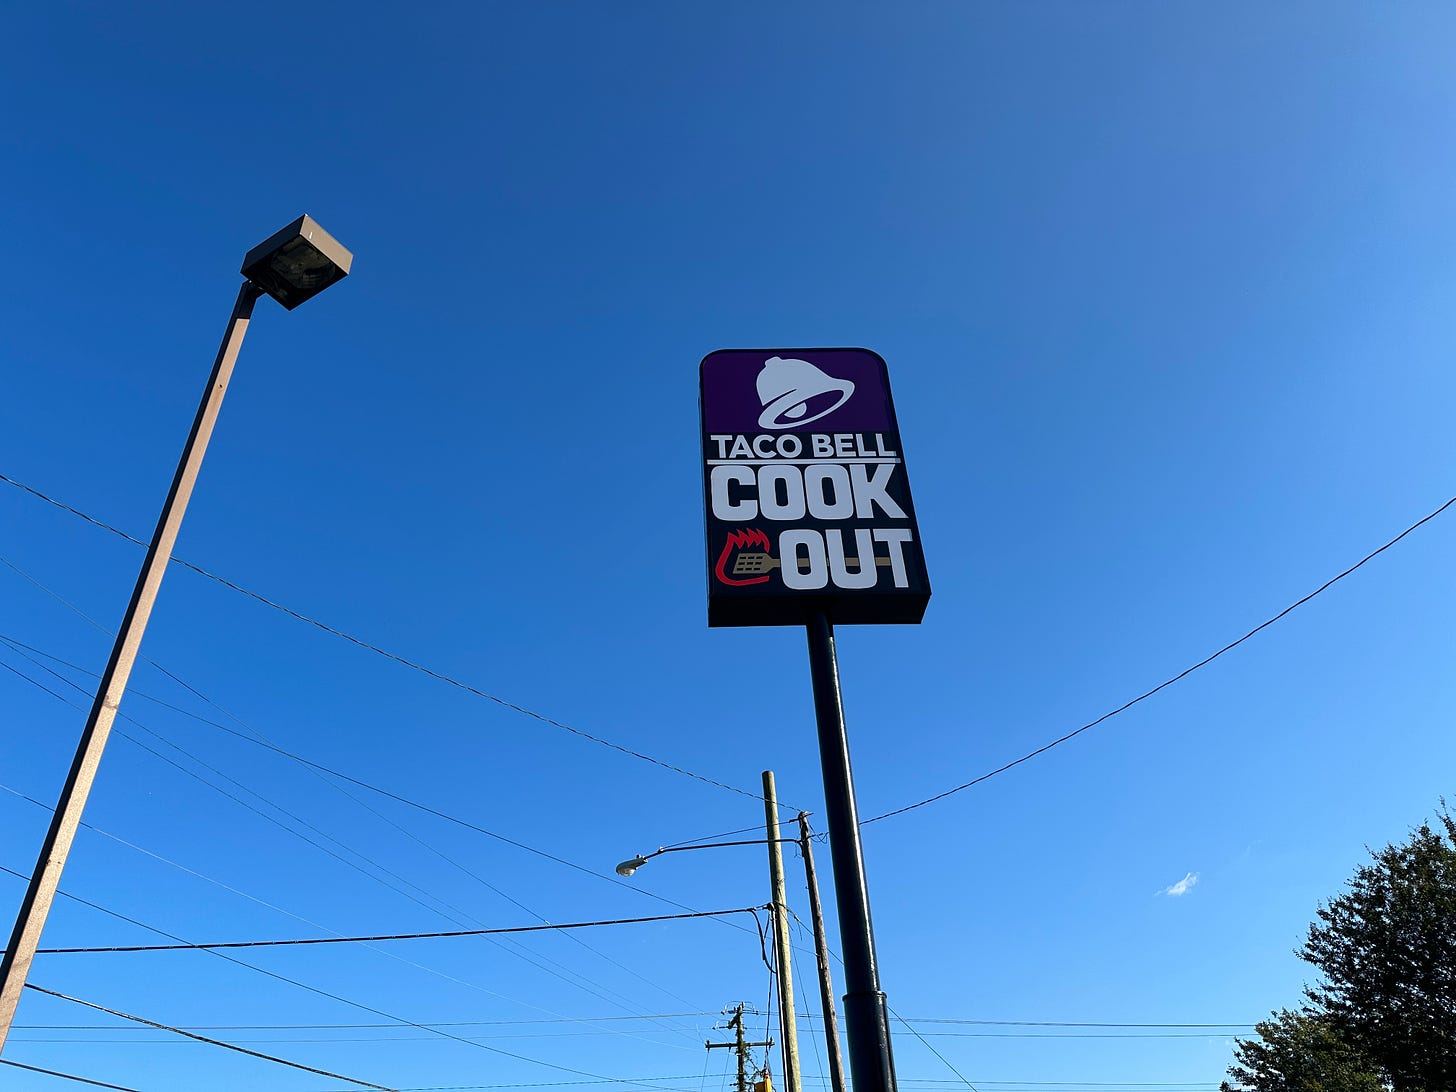 Taco Bell/Cook Out highway sign